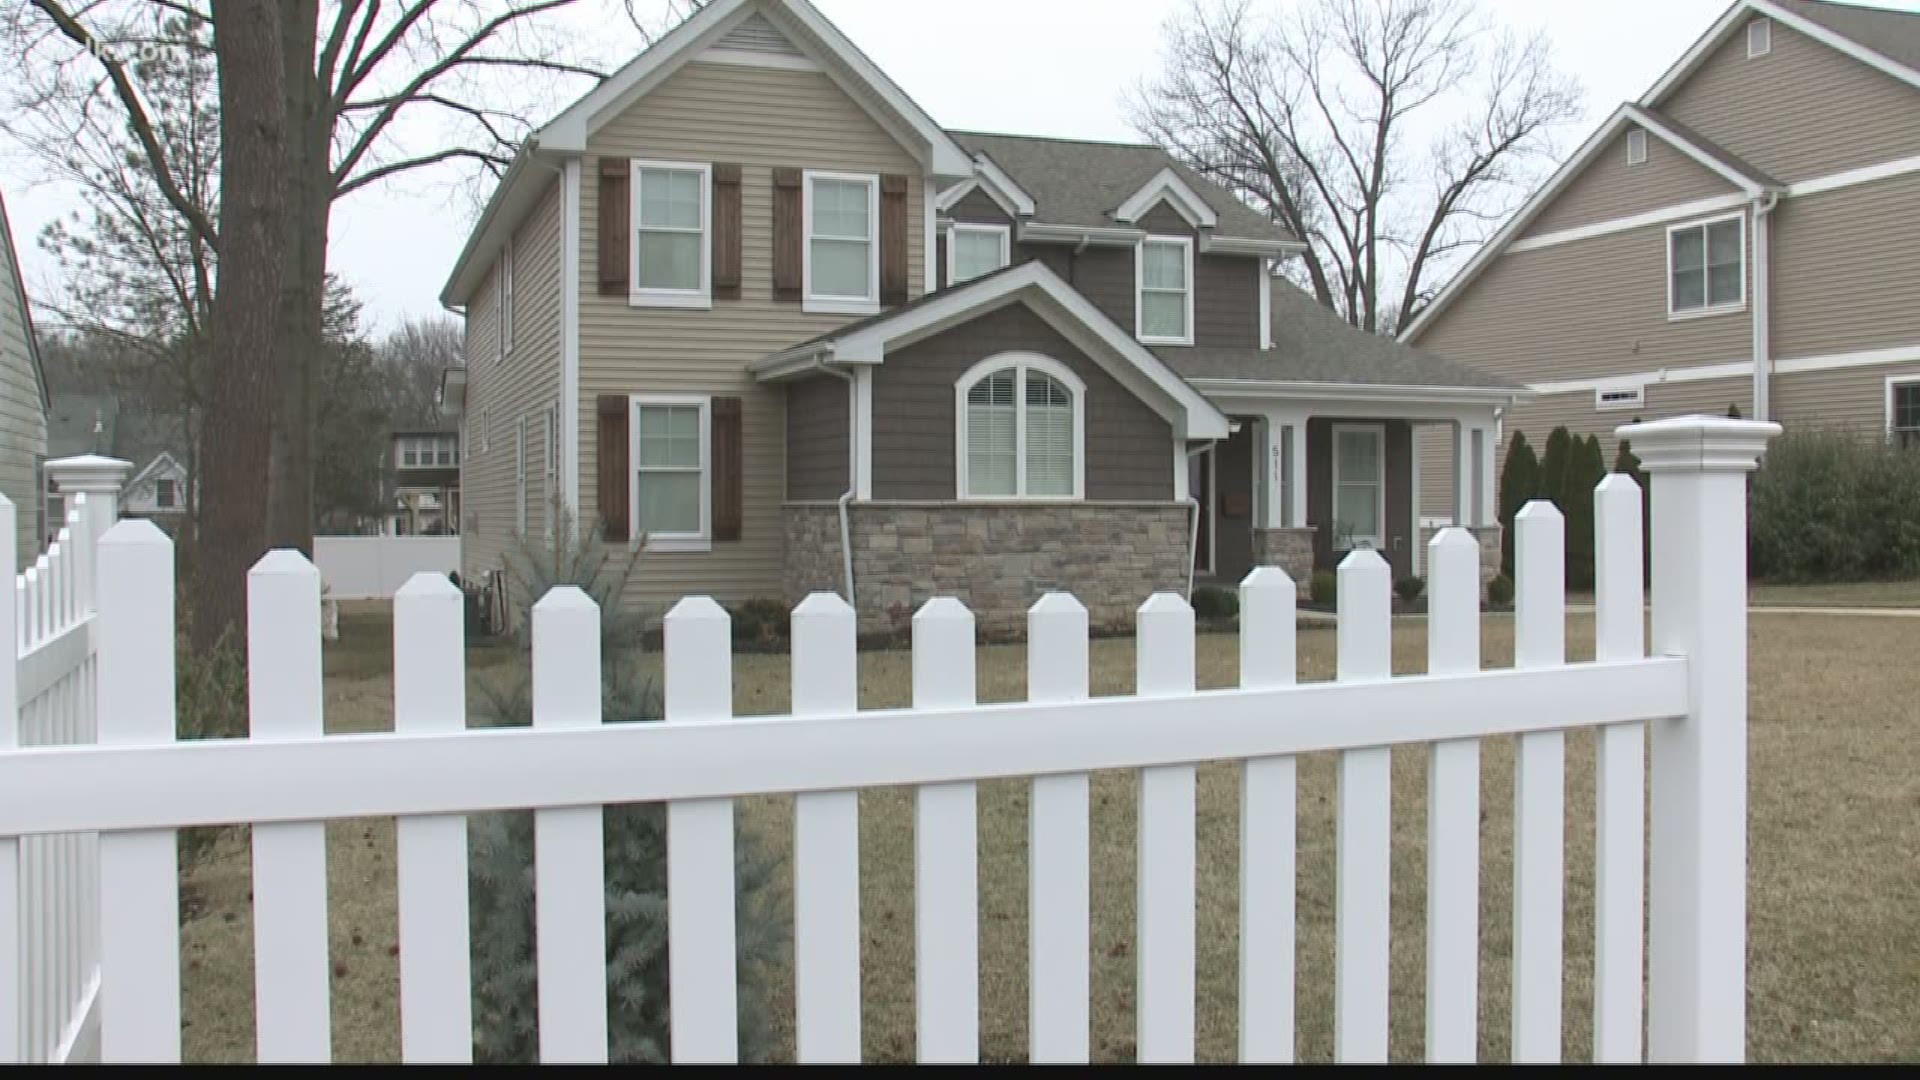 A new water regulation is going into effect next week, but many Kirkwood homeowners say the damage is already done.